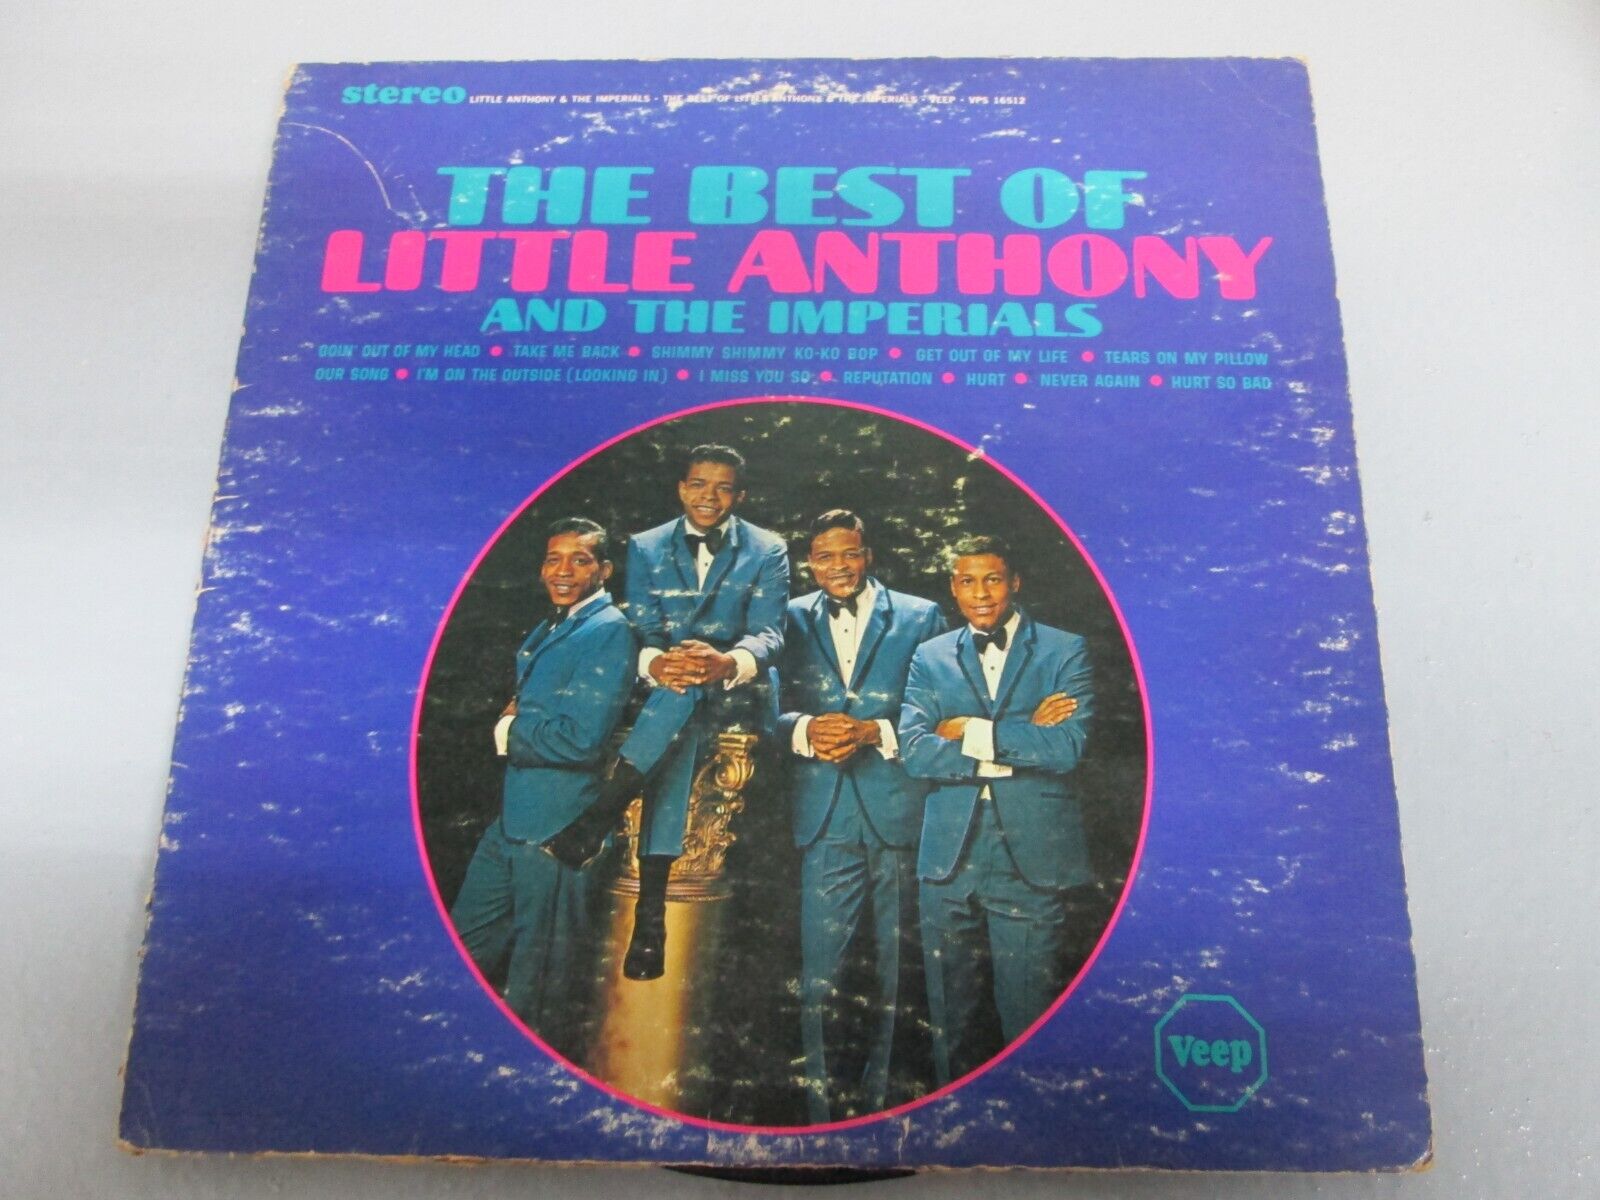 Little Anthony and the Imperials The best of VPS 16512 60S R&B SOUL LP